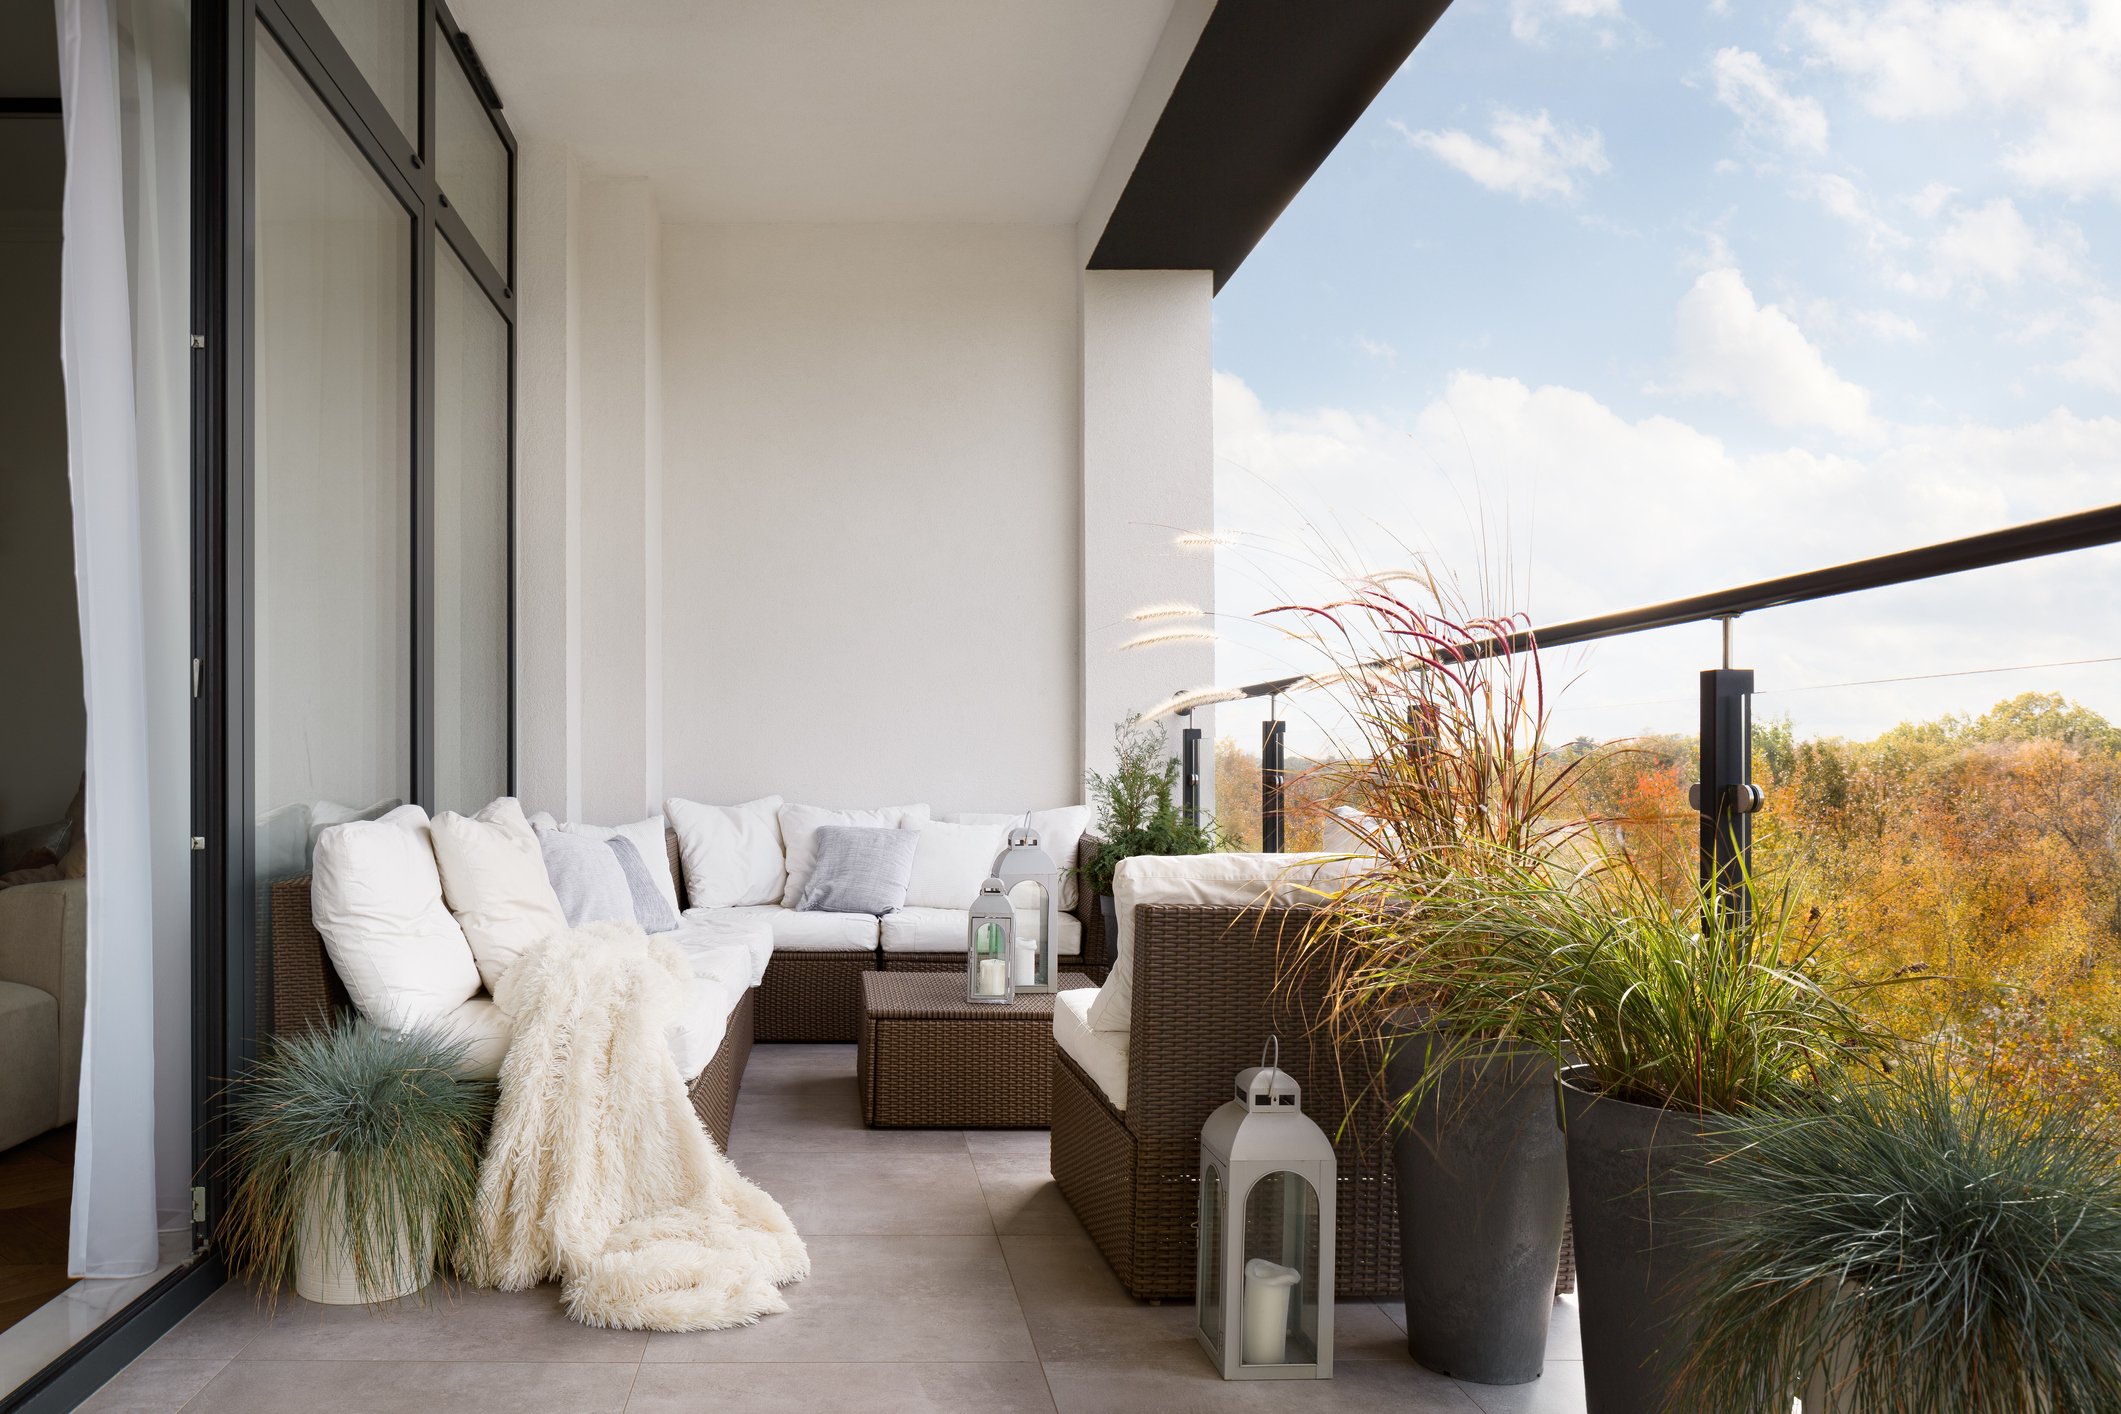 Rattan furniture, bright pillows and plants add an elegant touch to an otherwise boring balcony. (iStock Photo)